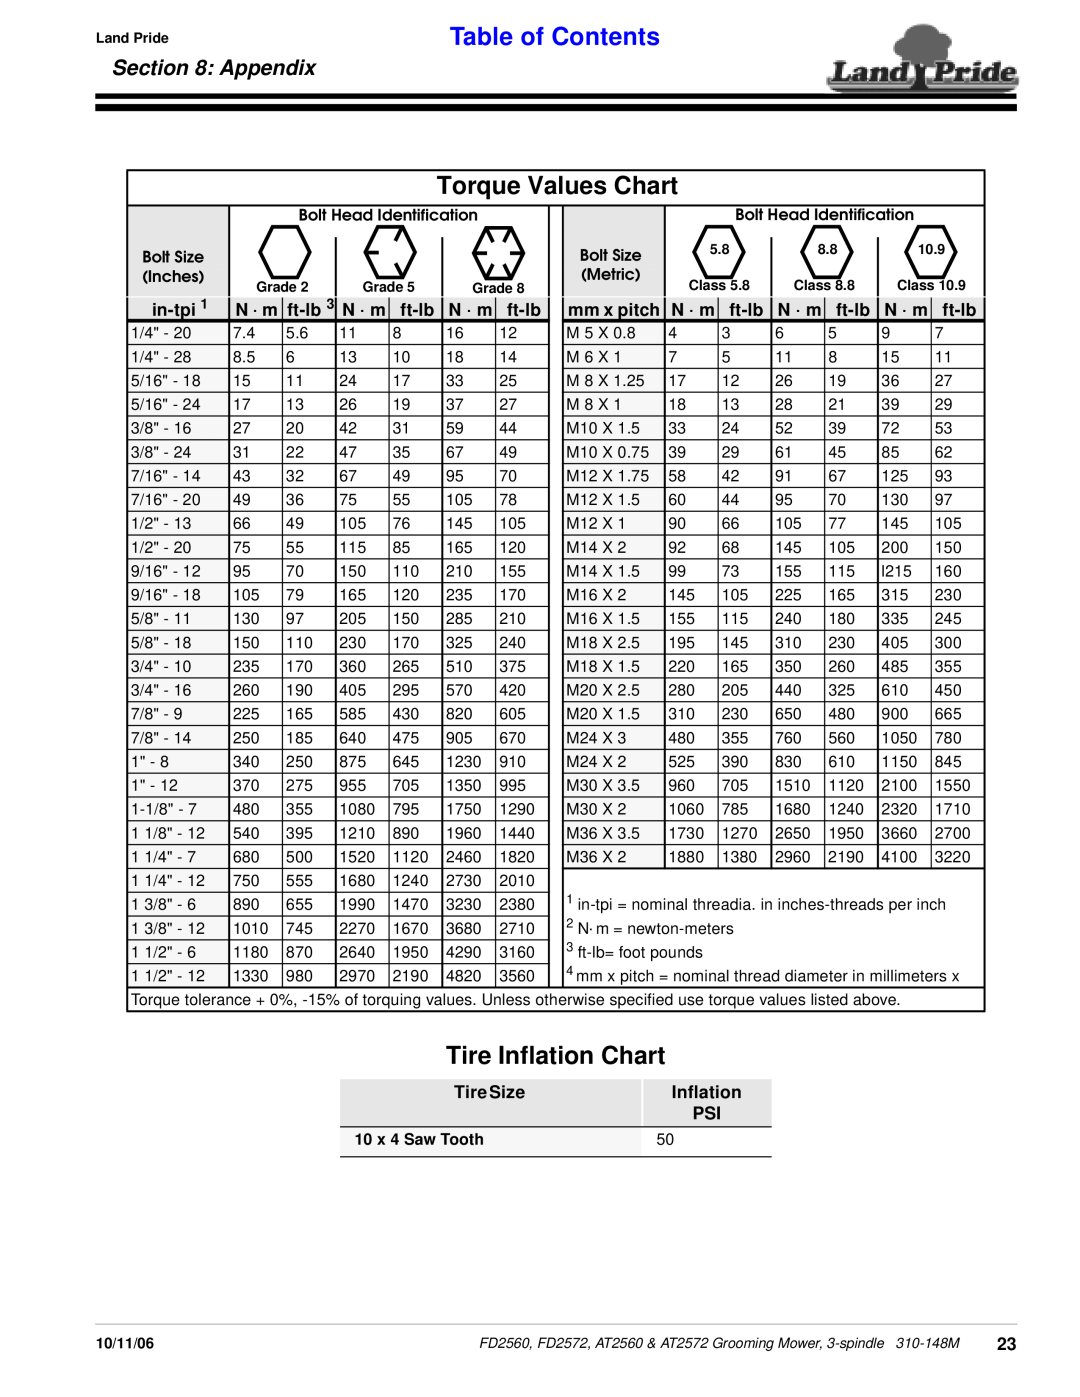 Land Pride AT2572 Torque Values Chart, Tire Inflation Chart, Appendix, Table of Contents, in-tpi, N · m, ft-lb, mm x pitch 